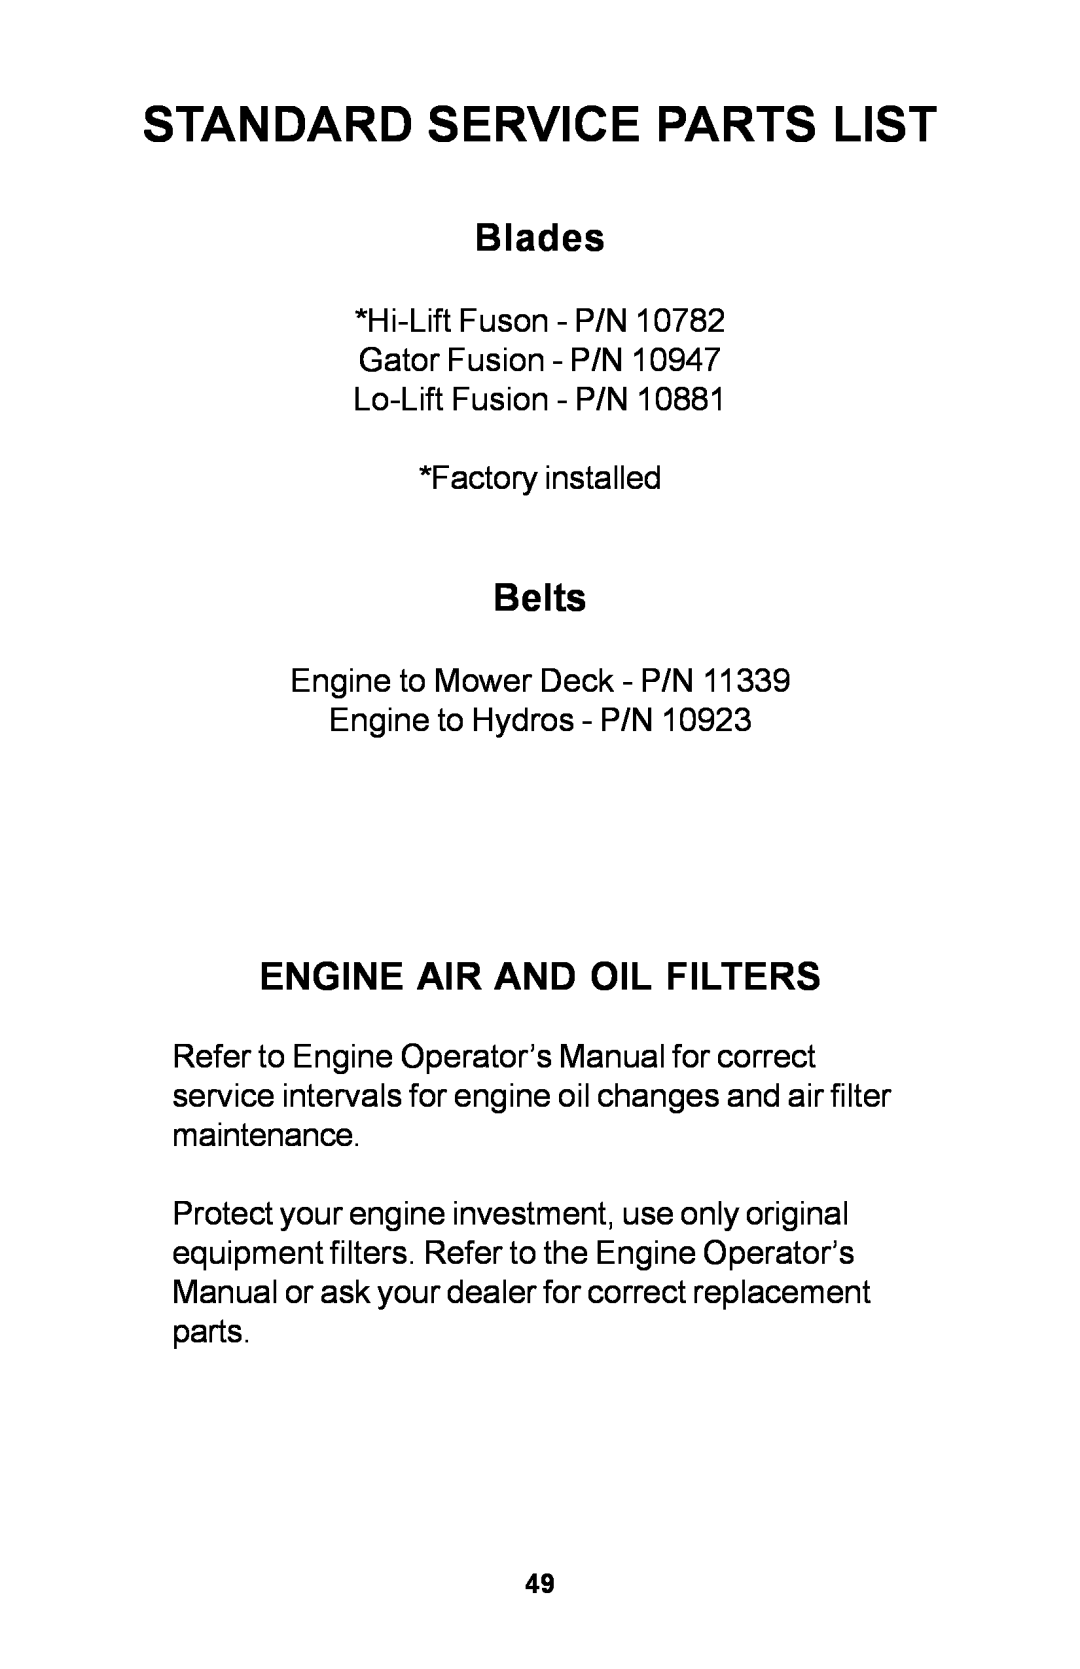 Dixon ZTR manual Standard Service Parts List, Blades, Belts, Engine Air And Oil Filters 